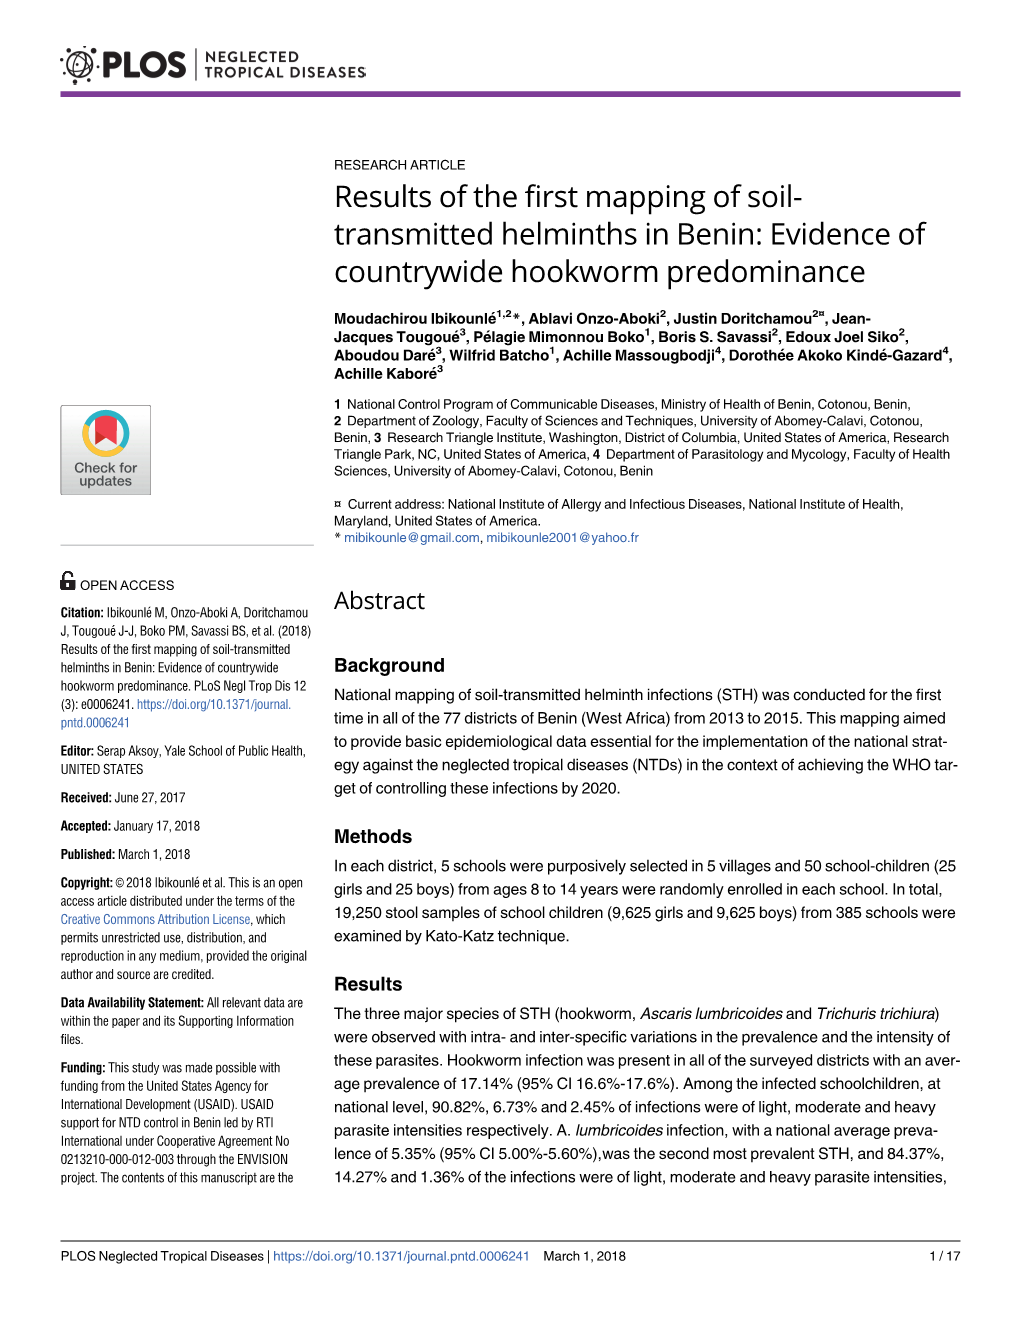 Results of the First Mapping of Soil-Transmitted Helminths in Benin: Evidence of Countrywide Background Hookworm Predominance